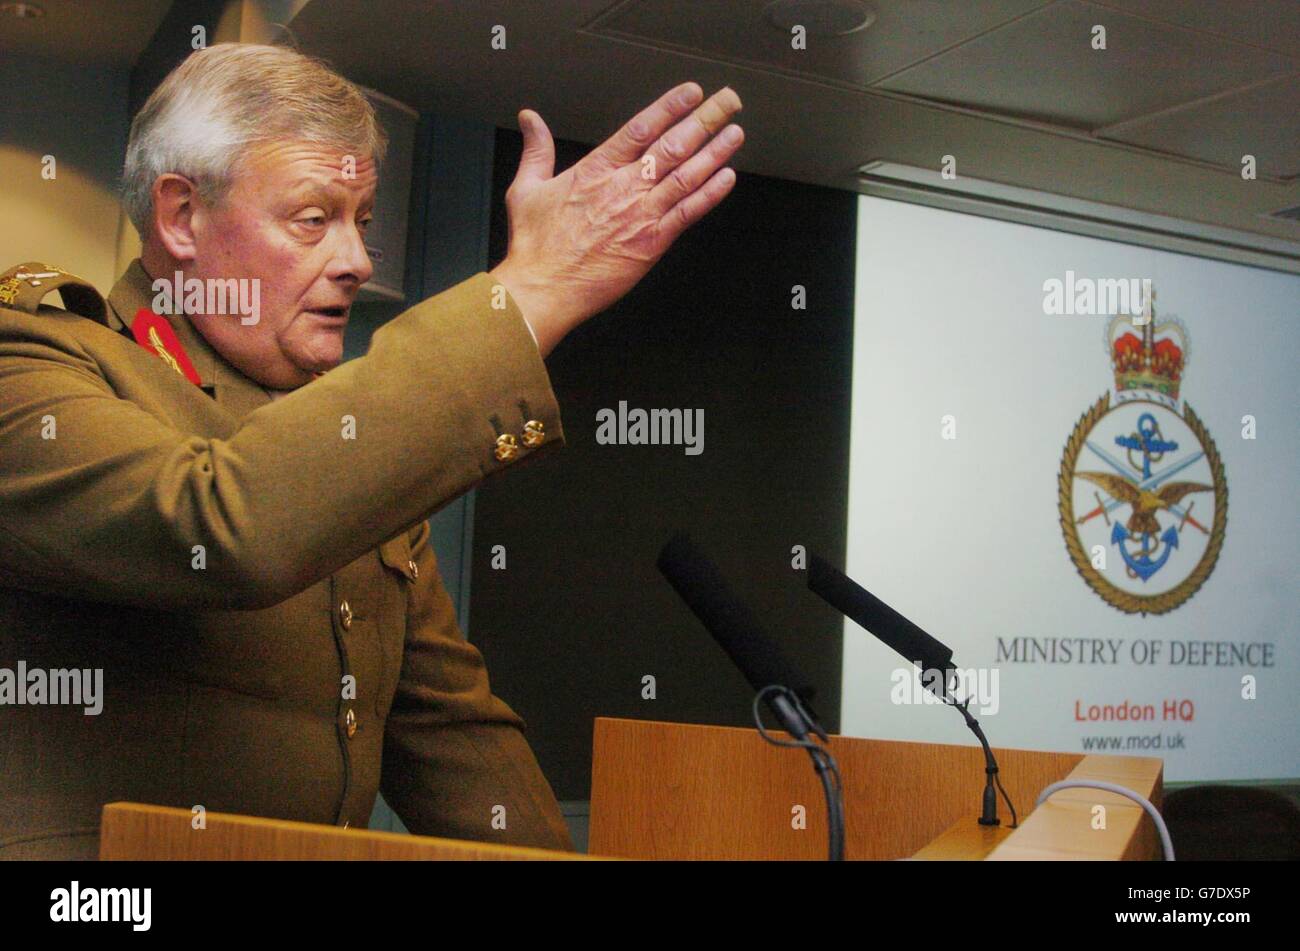 The Chief of Staff of Defence General Michael Walker answers questions from the press regarding the announcement by Defence Secretary Geoff Hoon of the deployment of British troops outside the MND (South East), during a press briefing inside the Ministry of Defence in central London. The Uk armoured battlegroup consisting of the 1st Battalion The Black Watch and supporting units will deploy to an area within MNF (West) to relieve a US unit for other tasks. The deployment will be of around 850 personnel and will for a limited time, lasting weeks and not months. Stock Photo